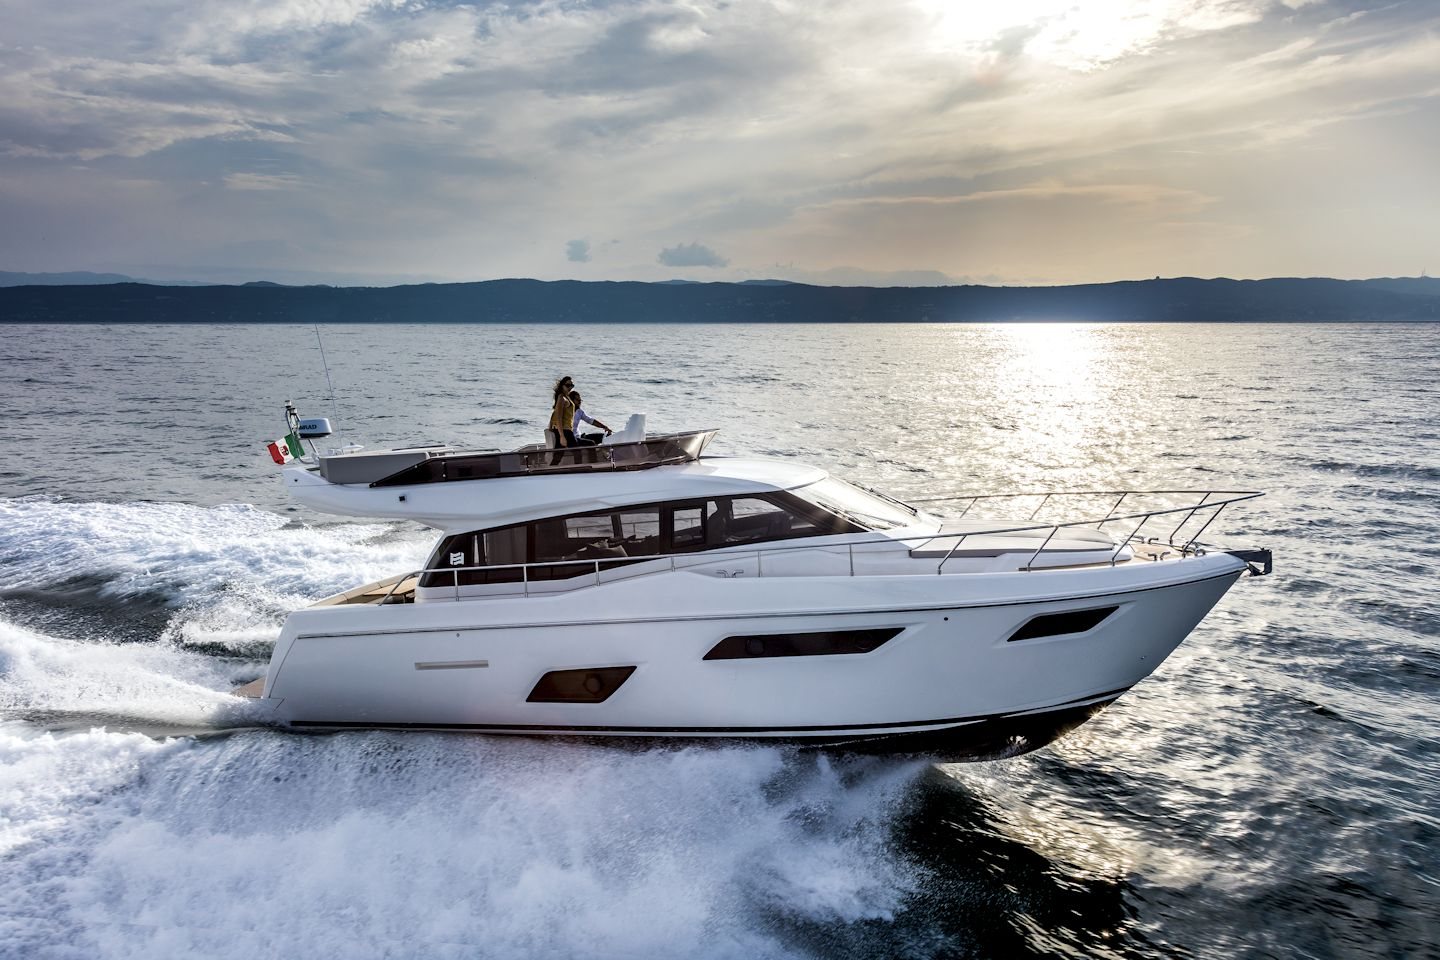 360 VR Virtual Tours of the Ferretti Yachts 450